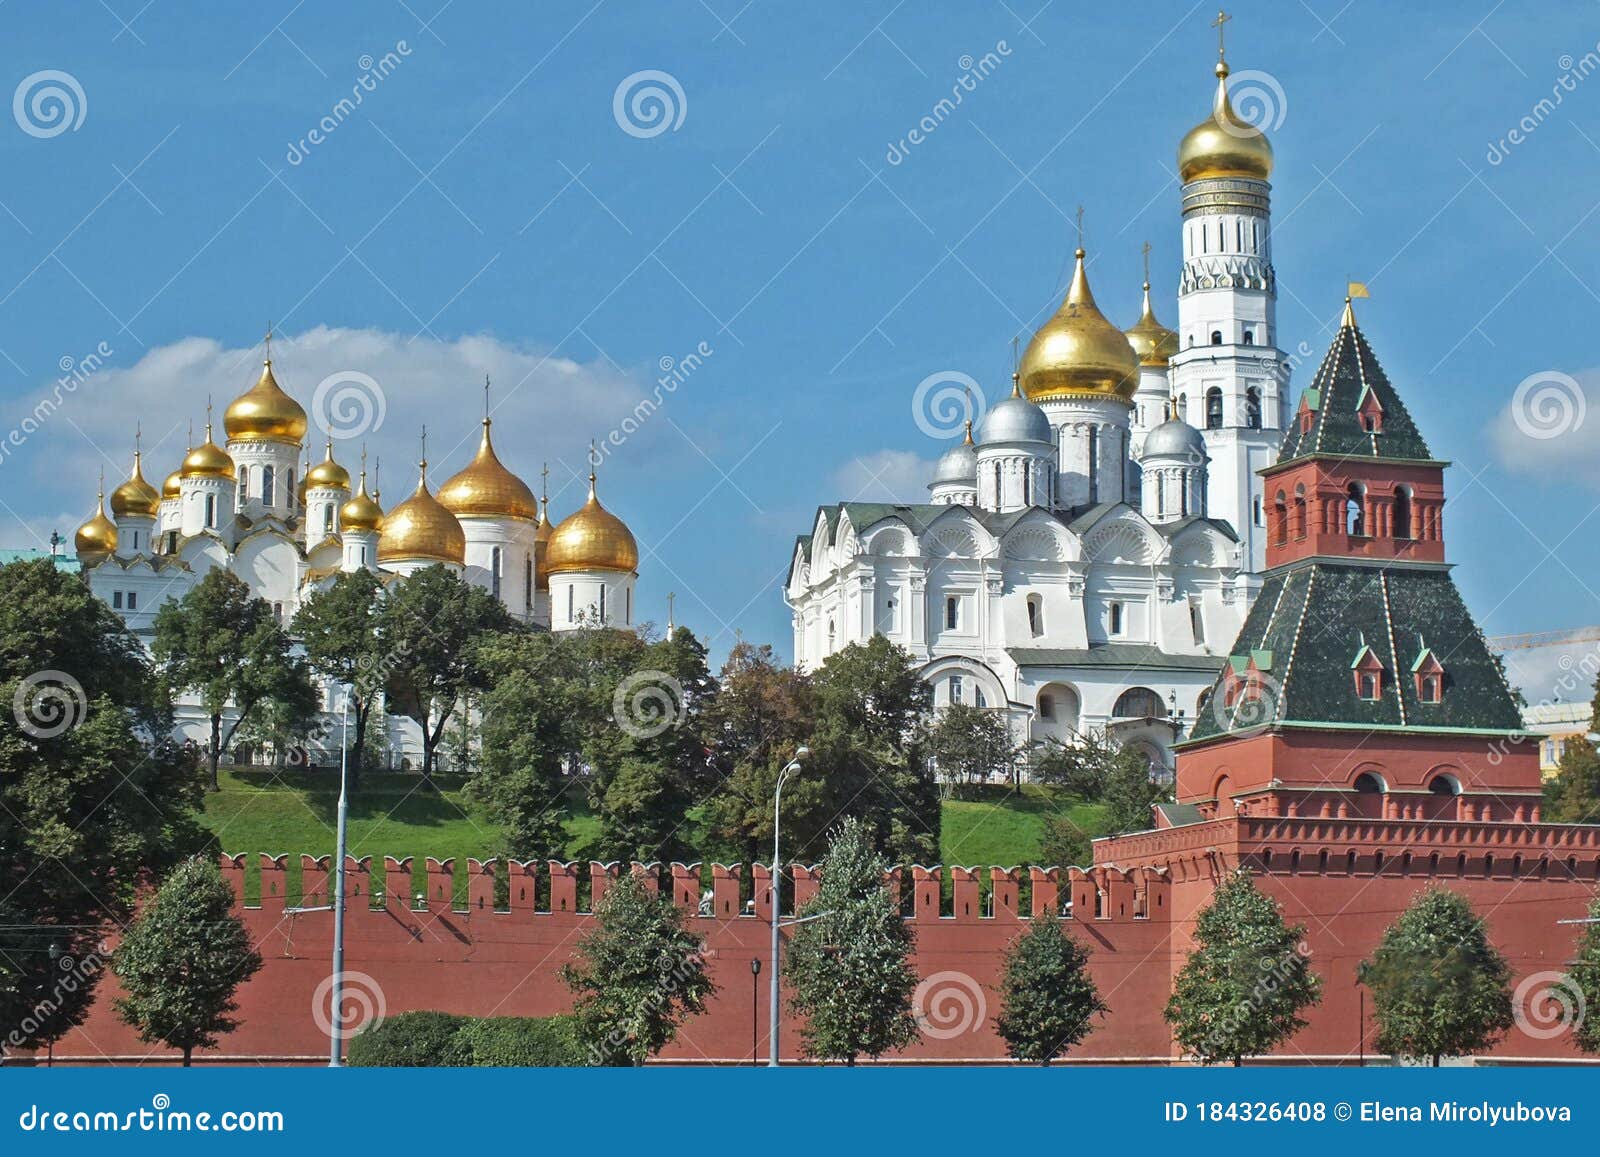 view of kremlin wall with tower and cathedrals photo made from opposite bank of the river moscow